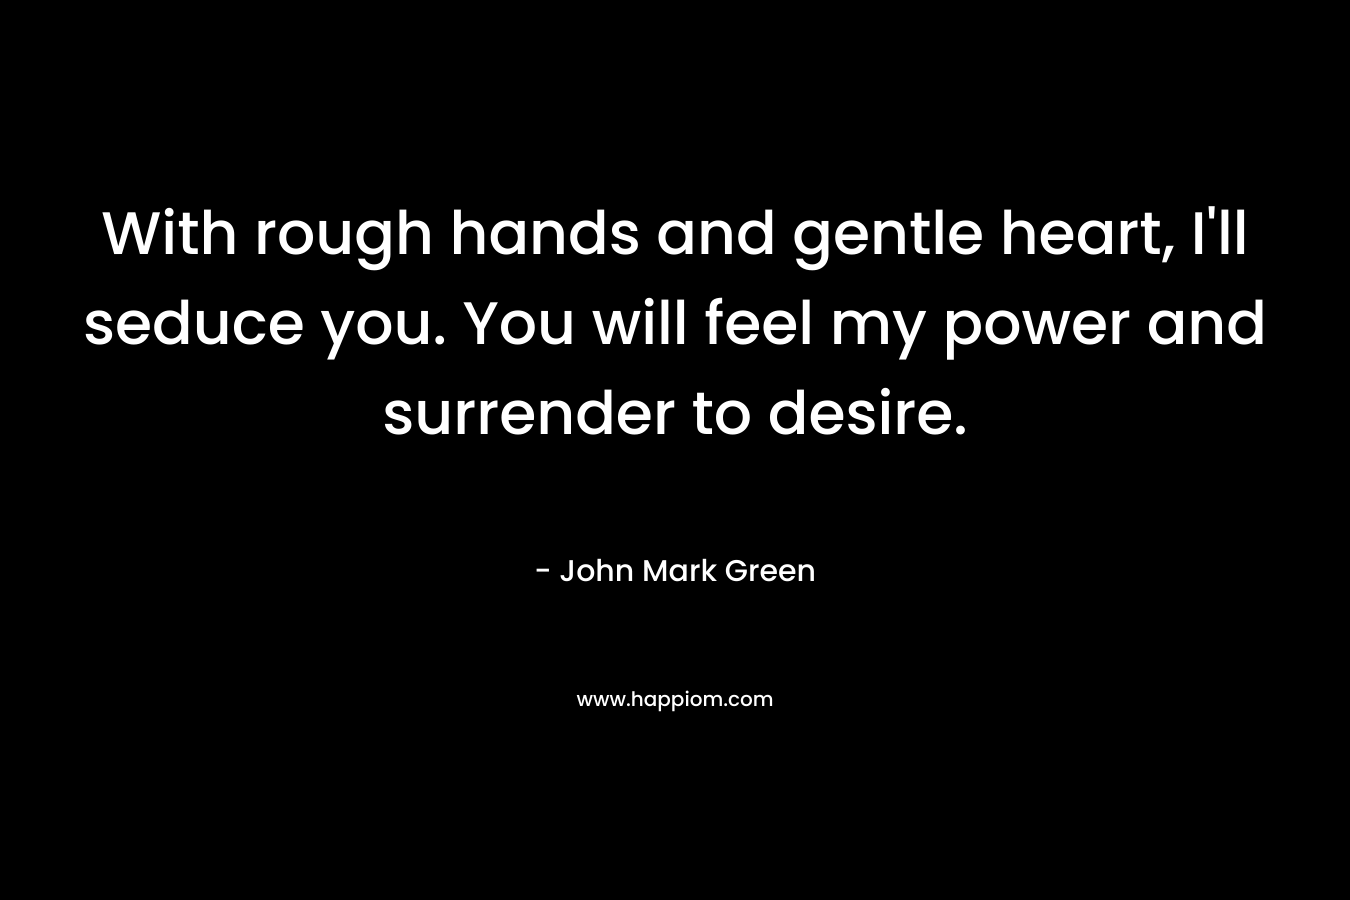 With rough hands and gentle heart, I'll seduce you. You will feel my power and surrender to desire.